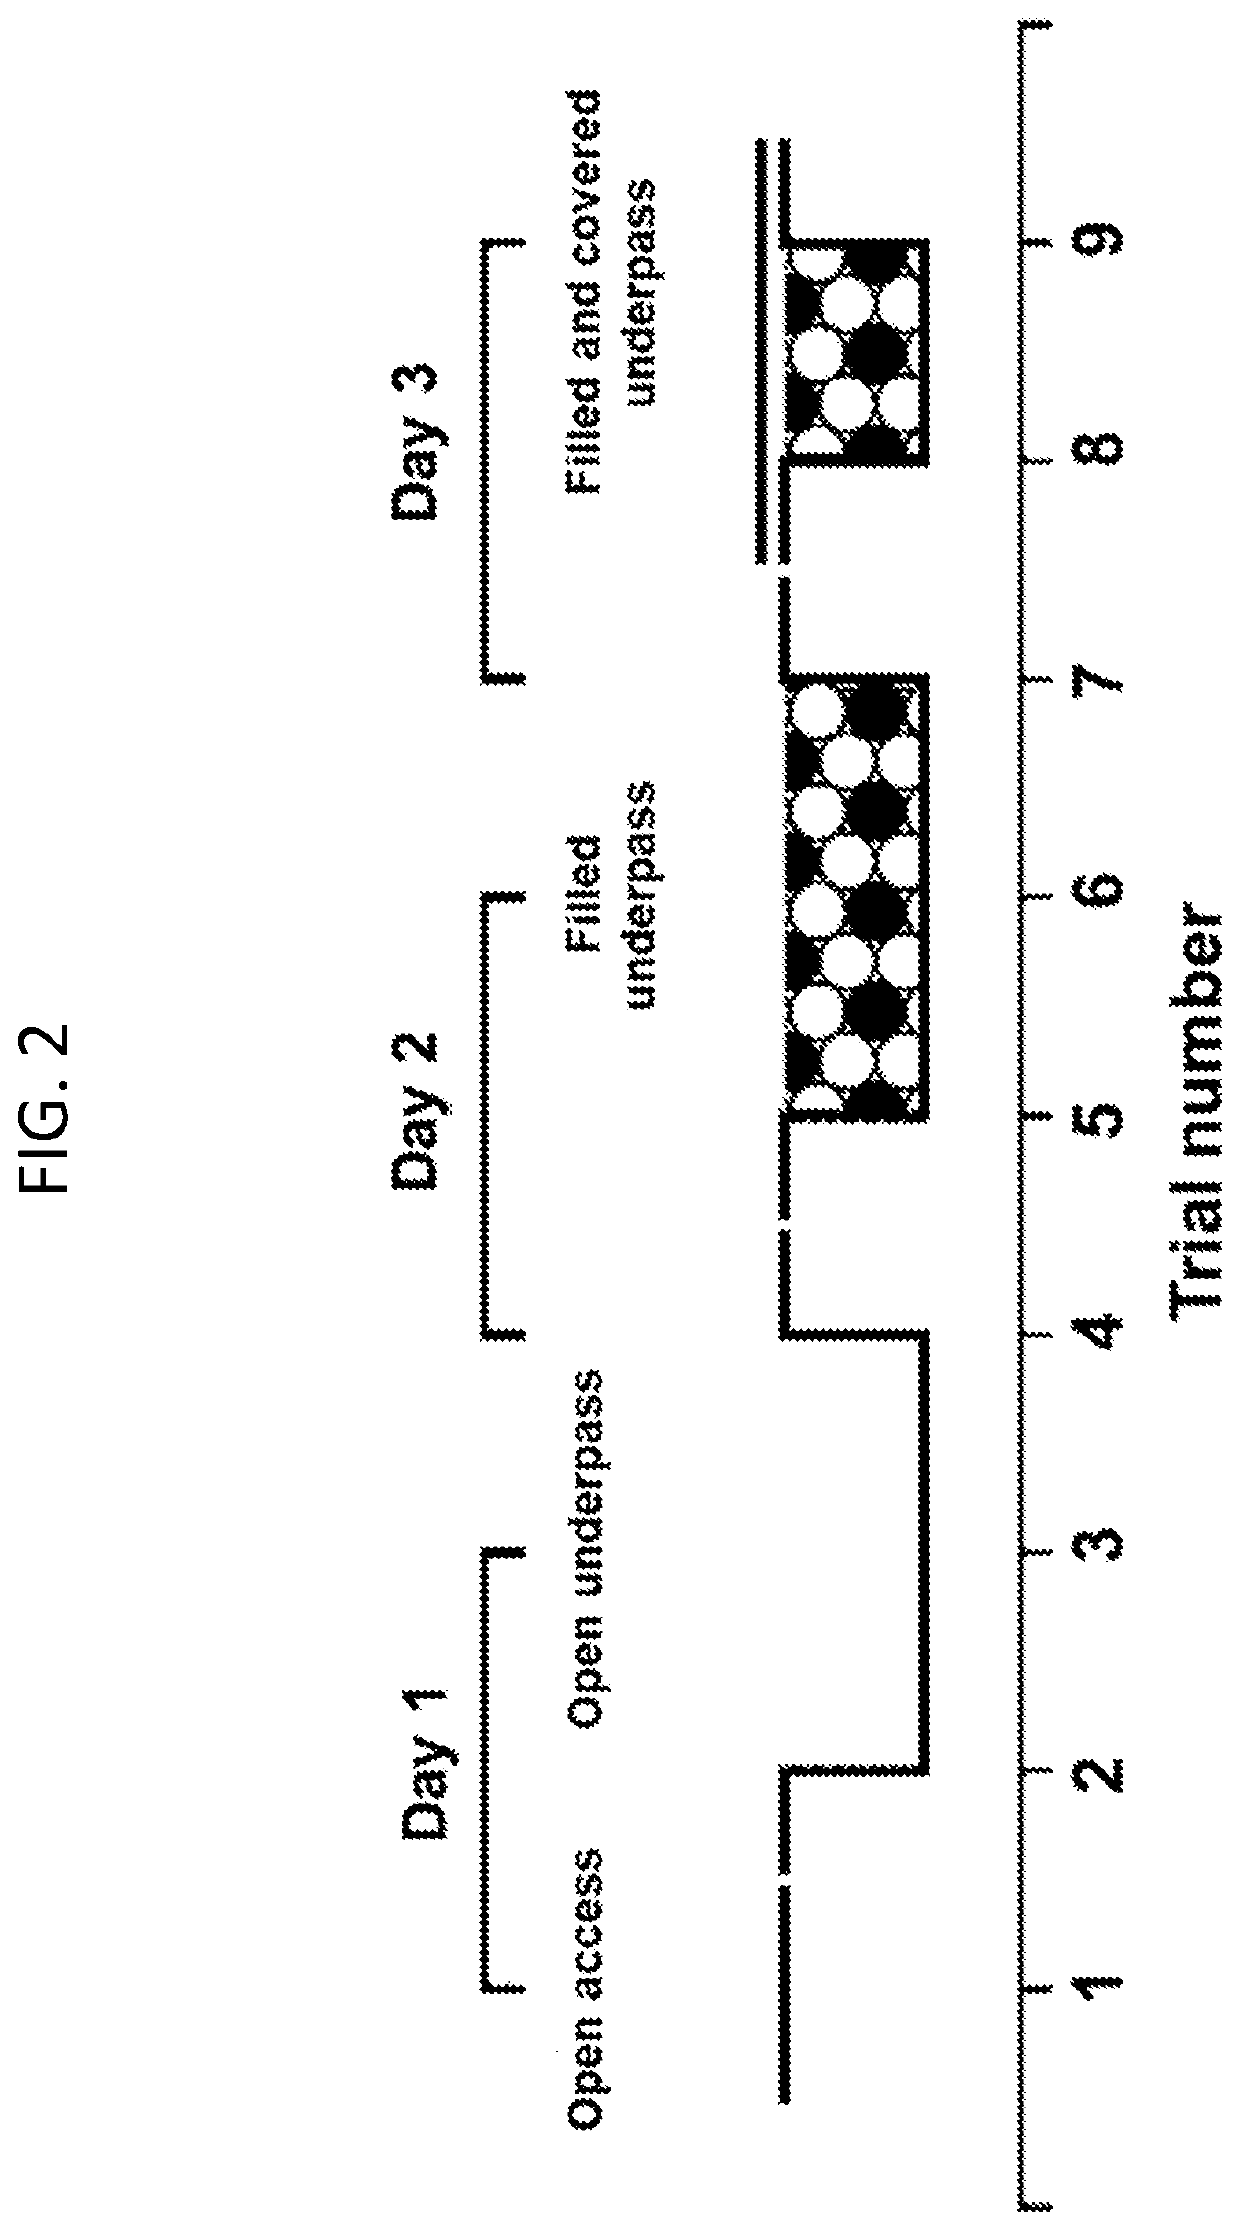 Pegylated cystathionine beta synthase for enzyme therapy for treatment of homocystinuria